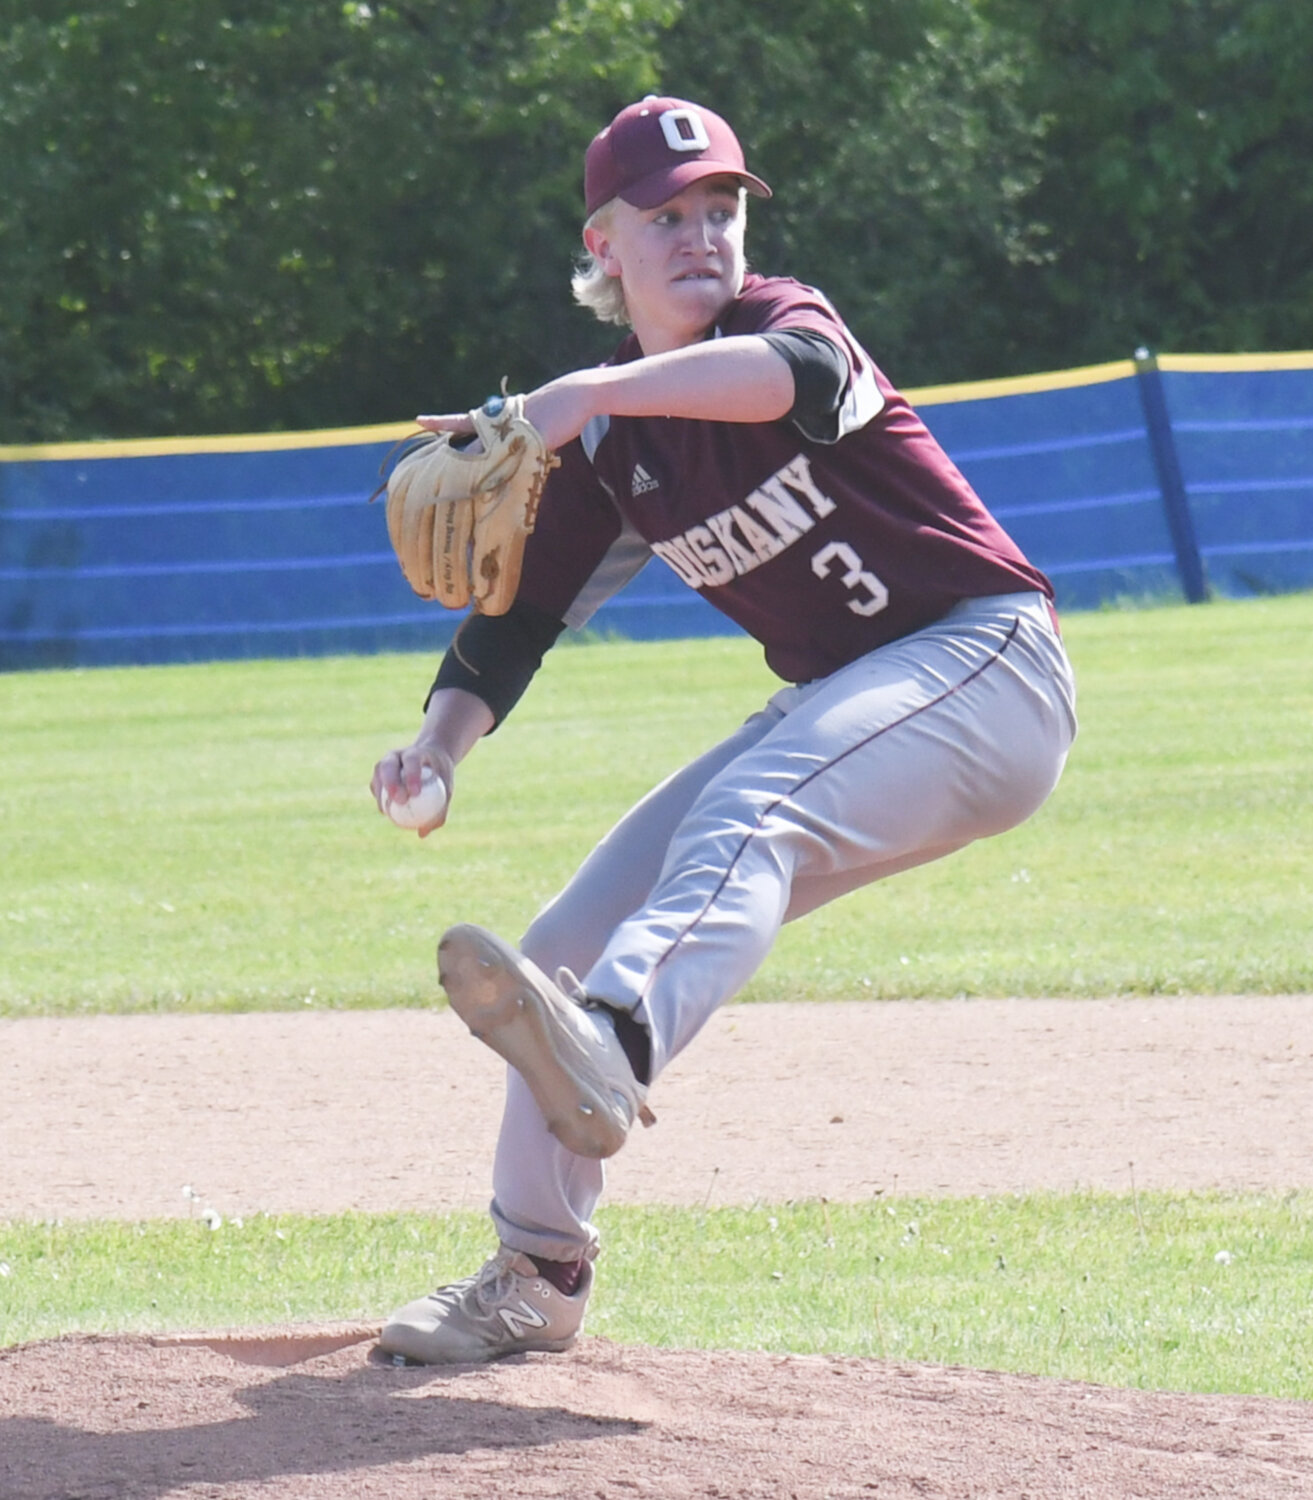 Oriskany pitcher Eddie Wright allowed four hits and seven walks while striking out 11 batters over 122 pitches in the team's 10-3 win over host New York Mills on Thursday in the Section III Class D quarterfinal game. The freshman has a 1.86 earned-run average this season.